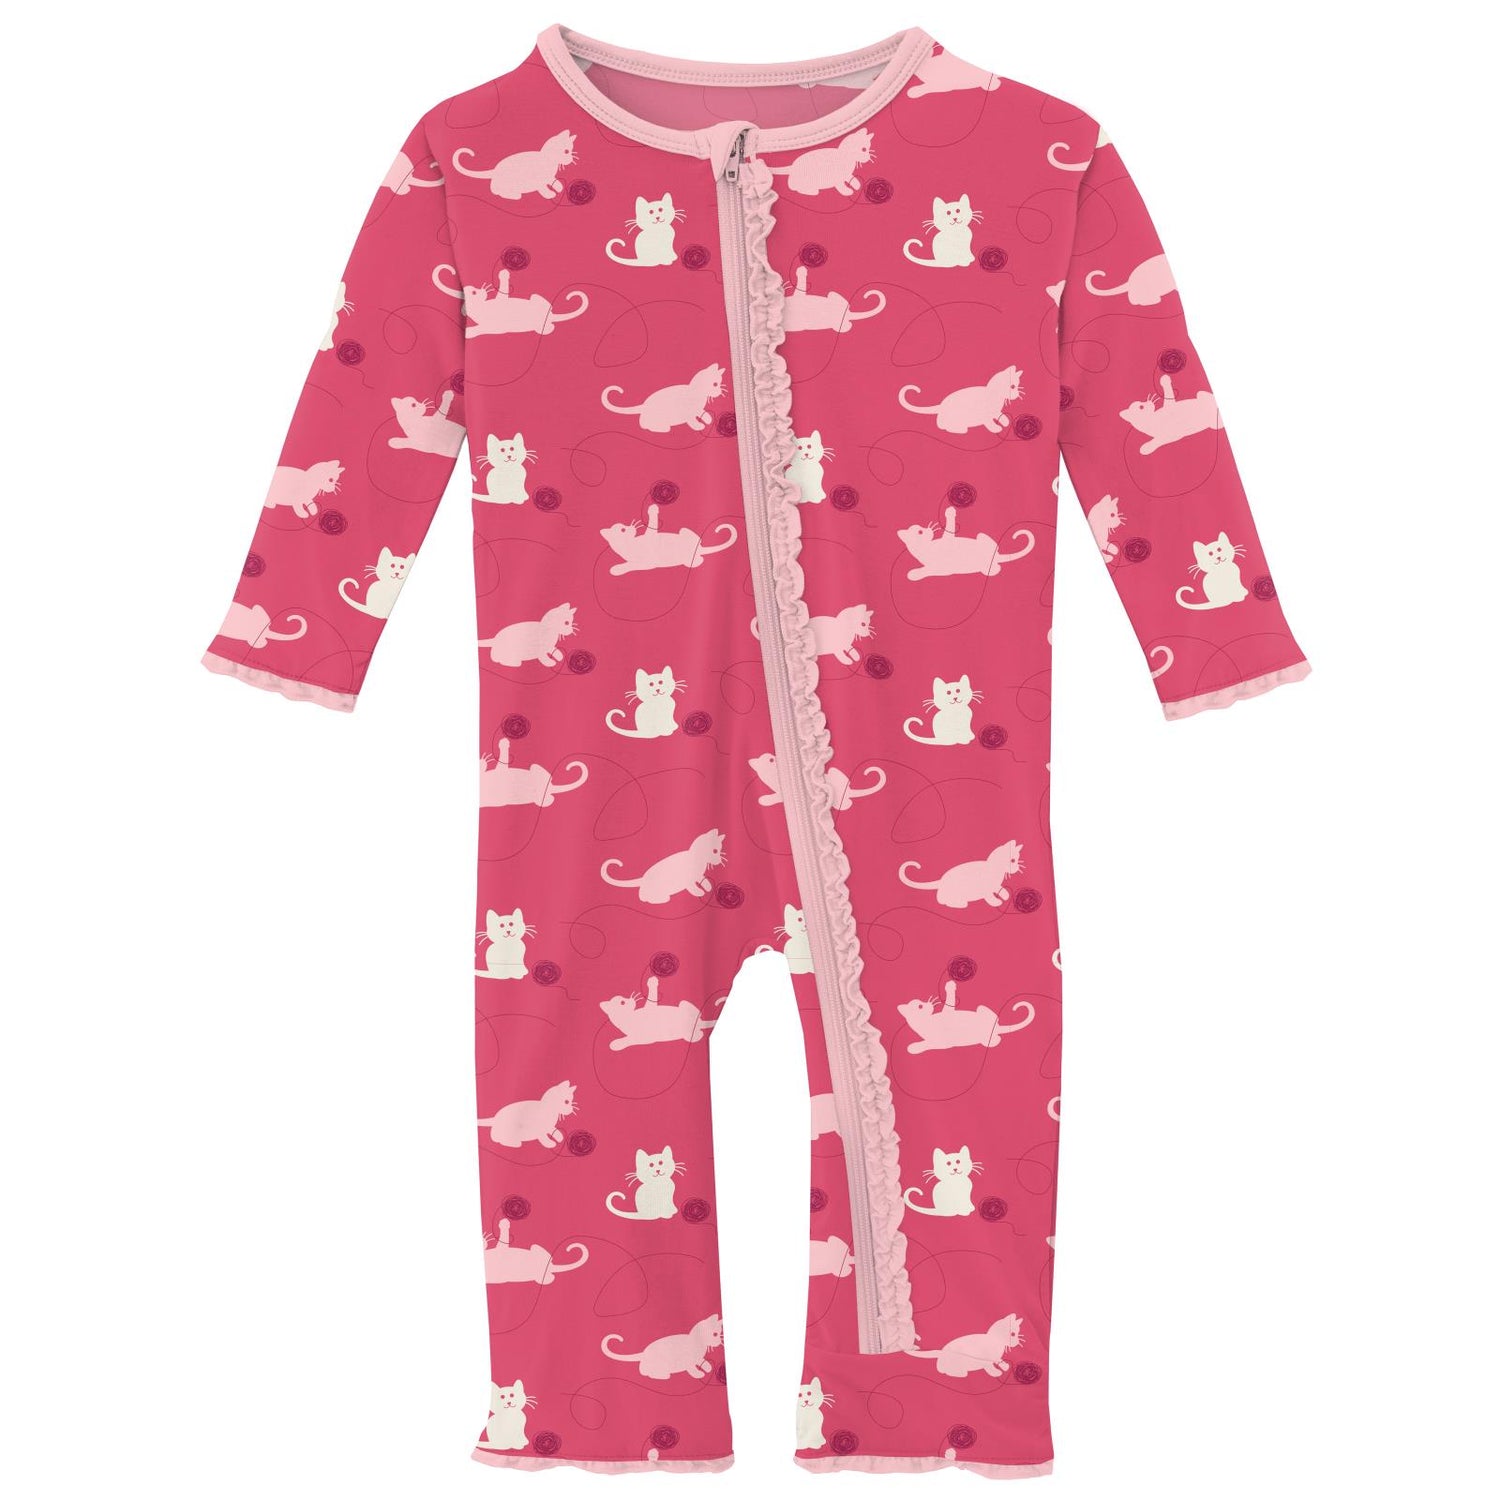 Print Muffin Ruffle Coverall with Zipper in Winter Rose Kitty